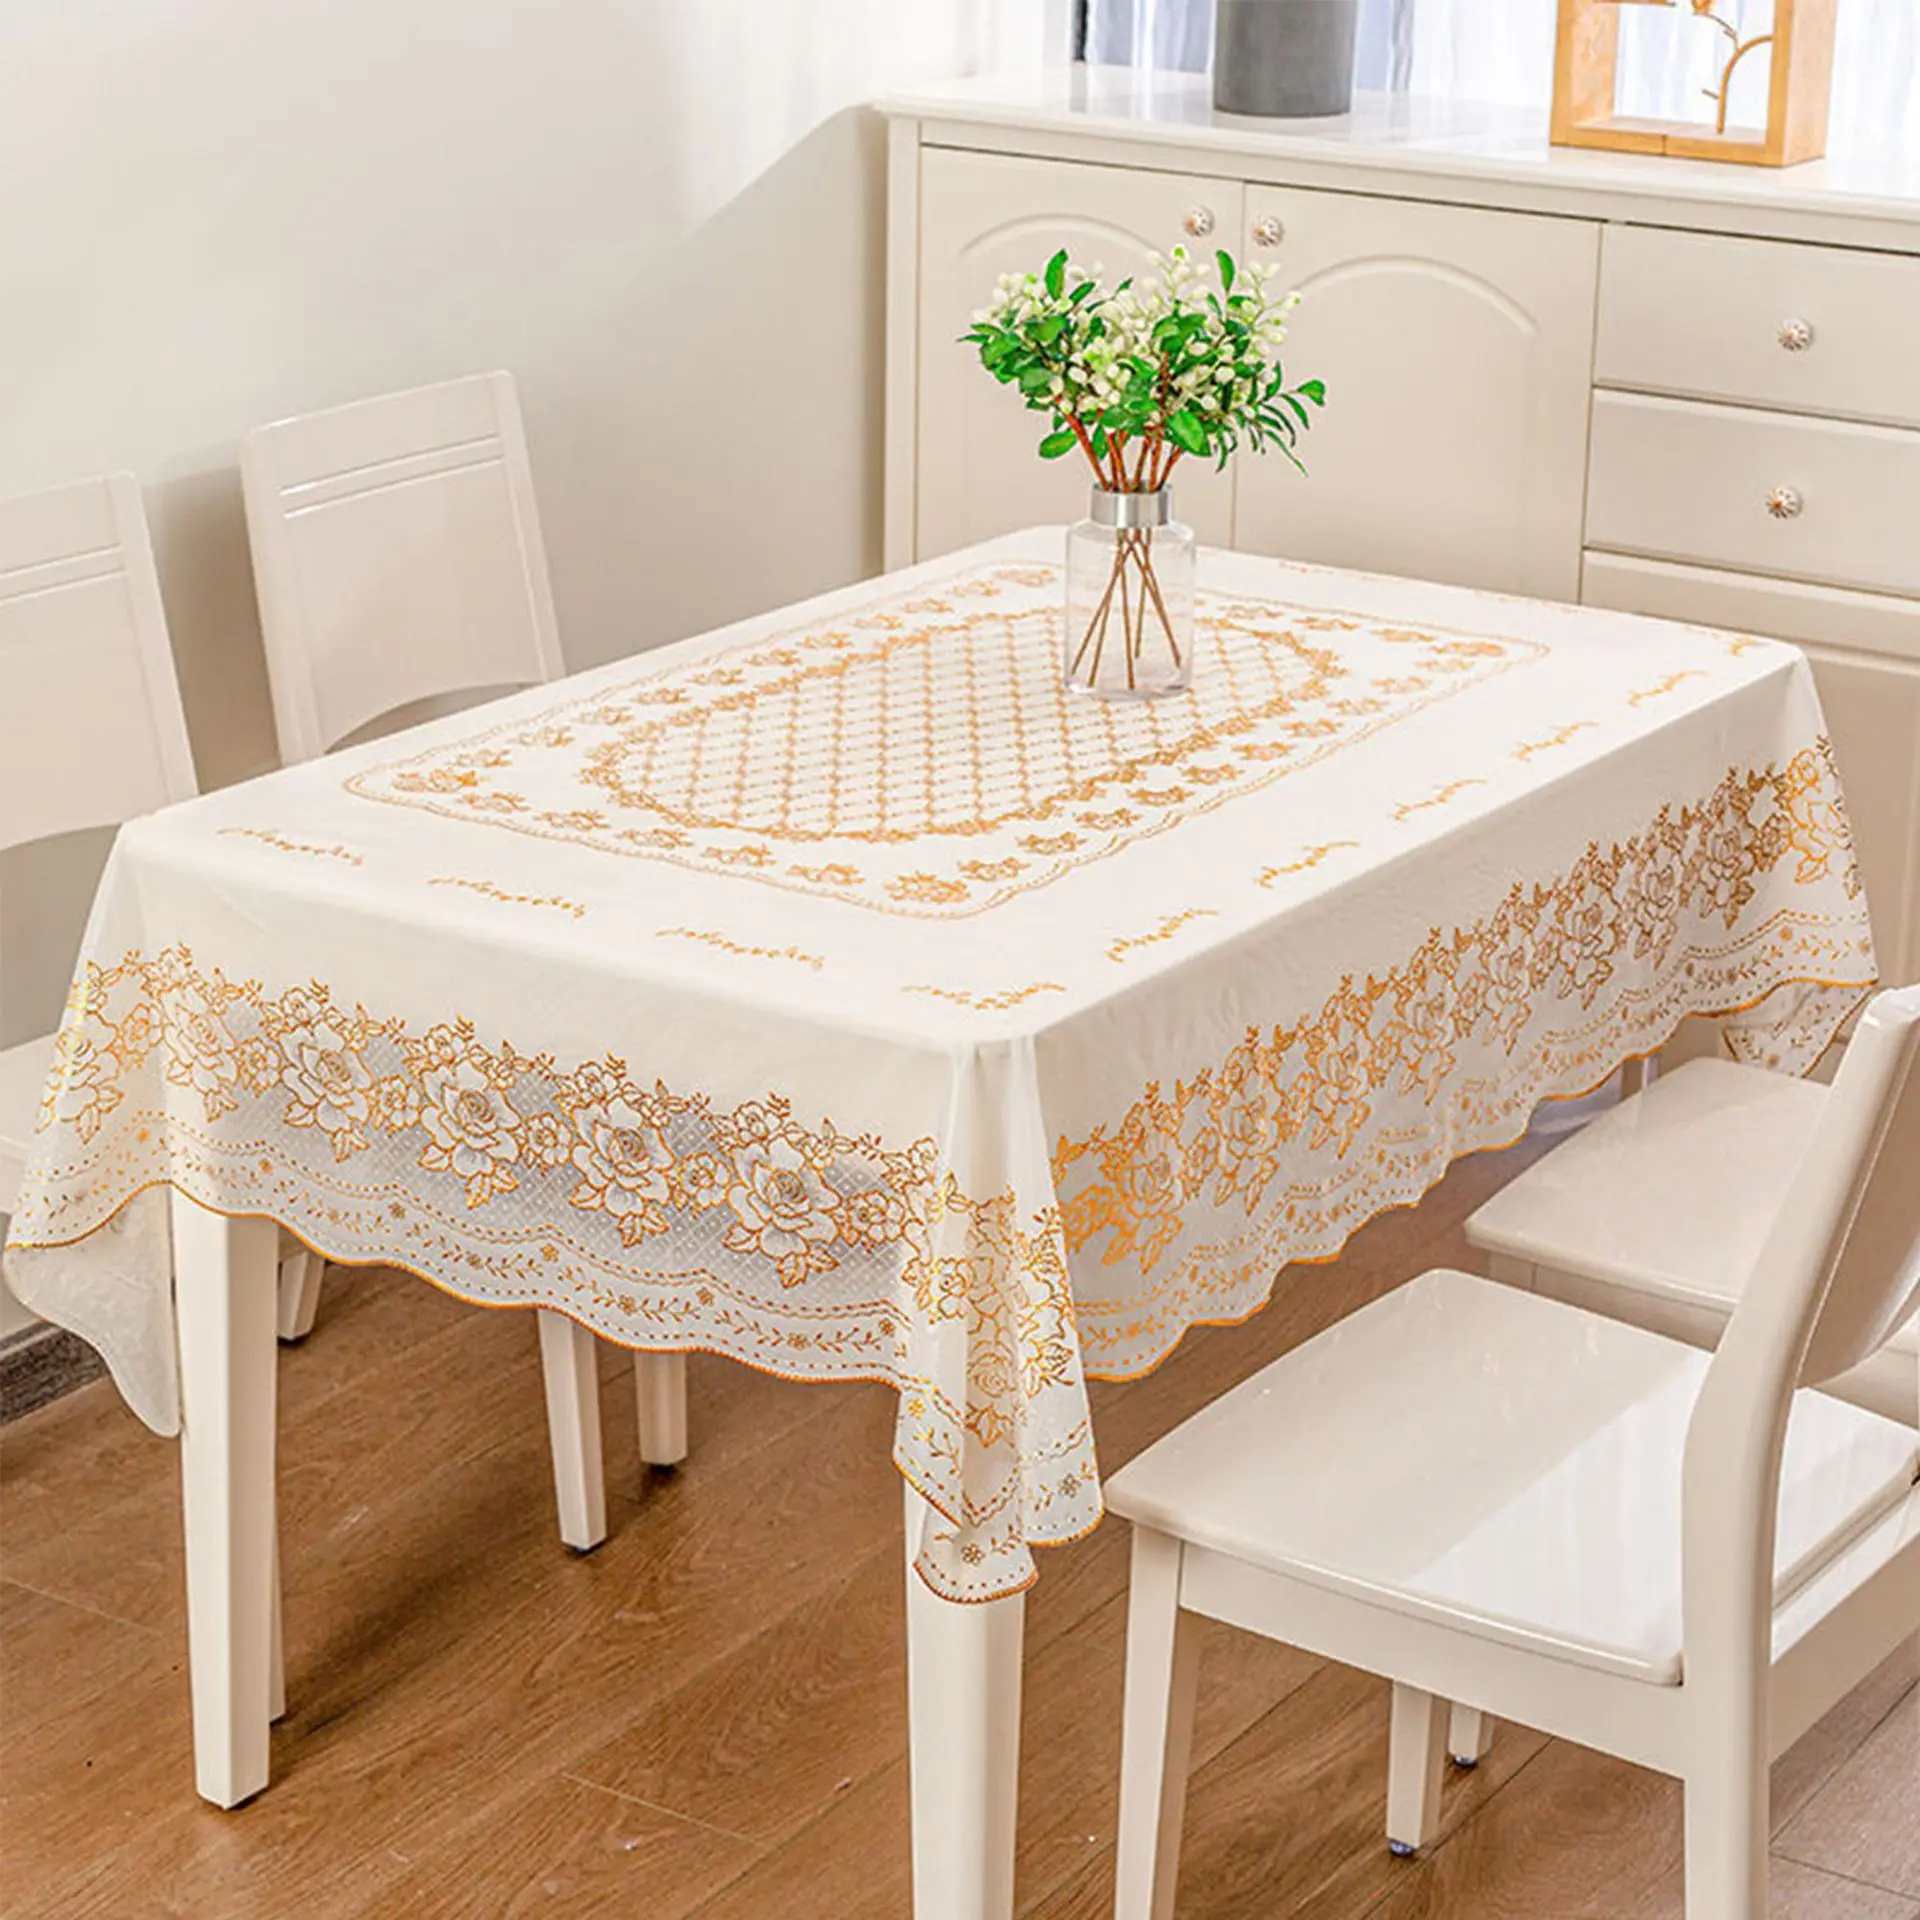 

PVC Bronzing Lace Tablecloth Waterproof Oil-proof Table Cover Rectangular Furniture Decorative Dining Table Cloth